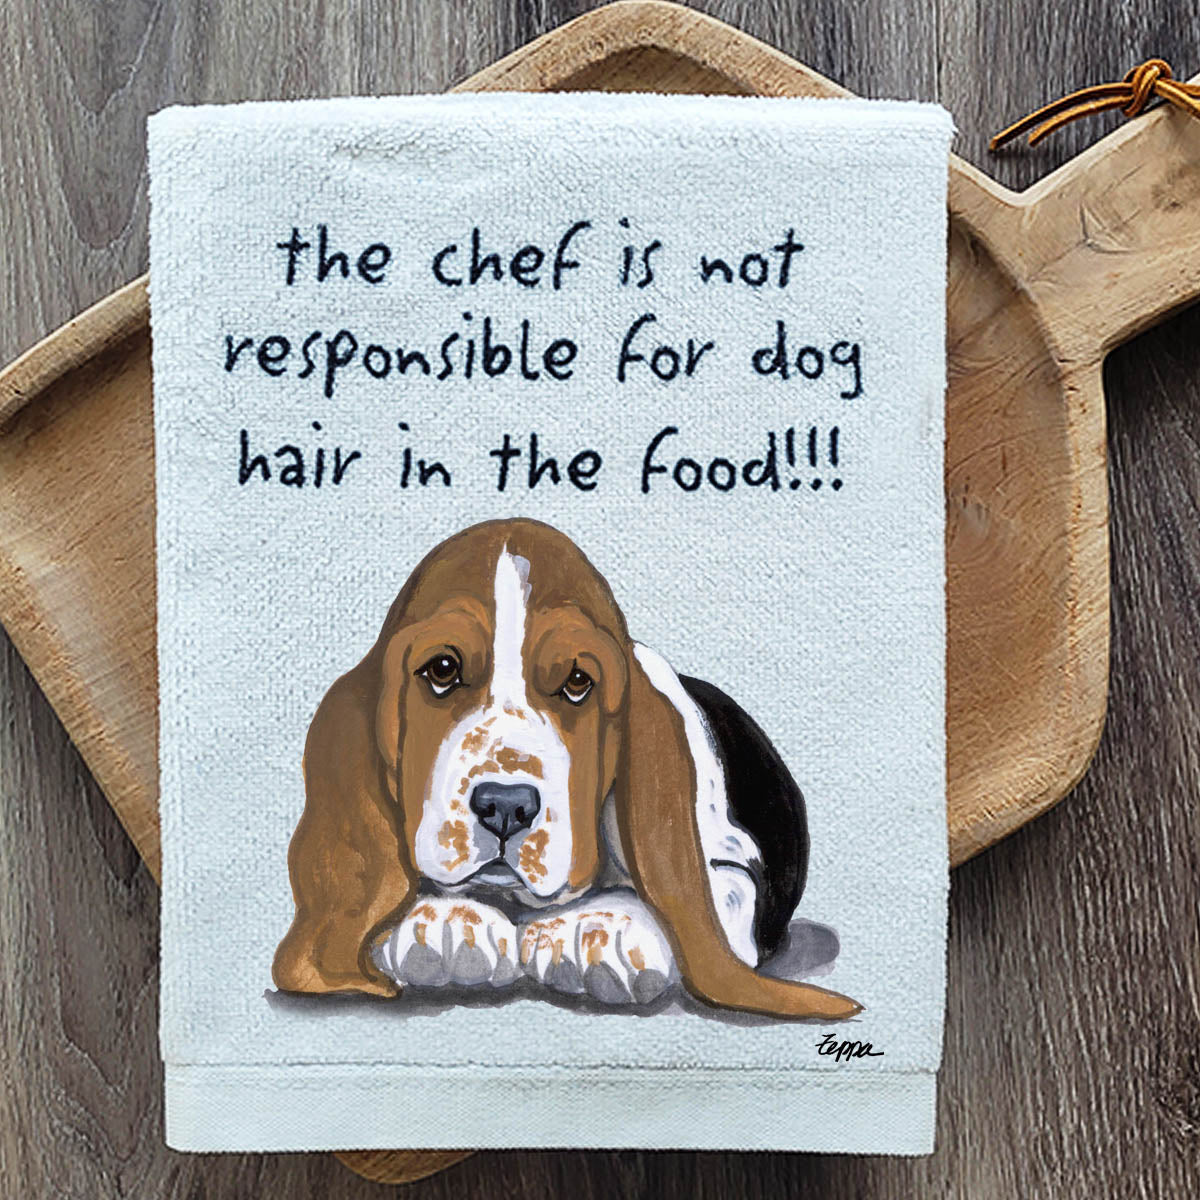 Pawsitively Adorable Basset Hound PuppyKitchen Towel